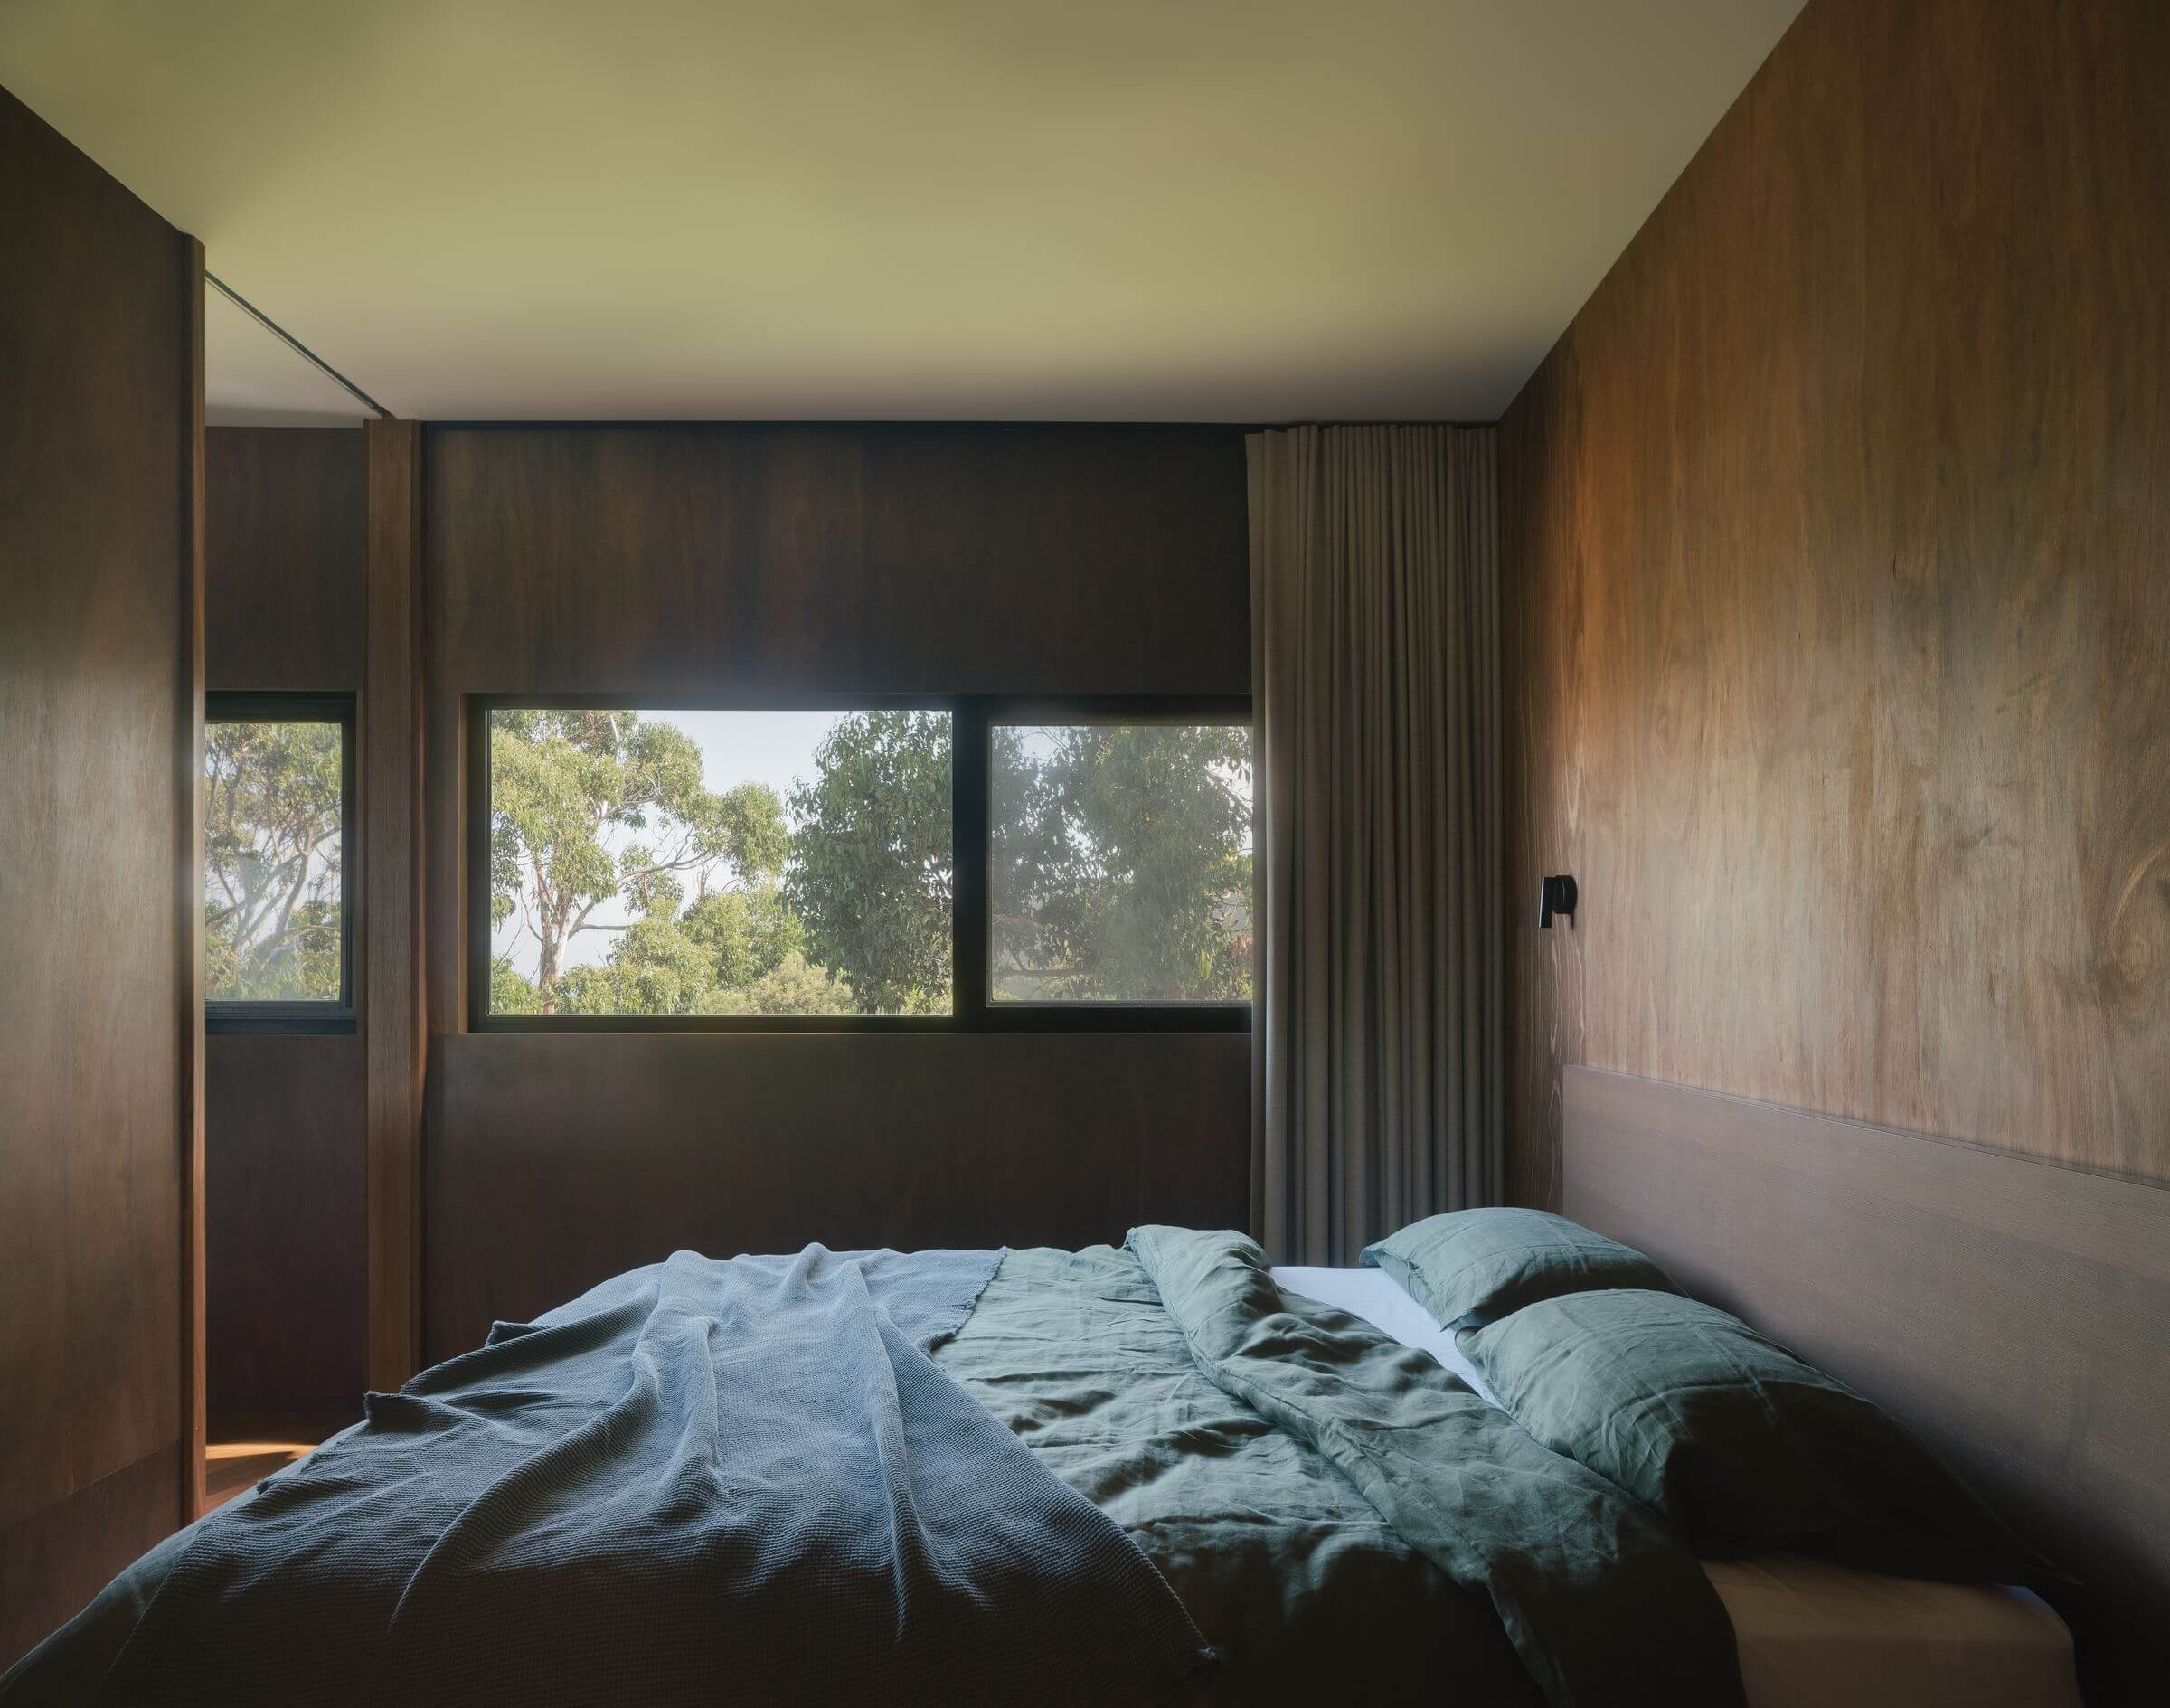 Kennett River House by MGAO showing timber lined bedroom looking out over trees